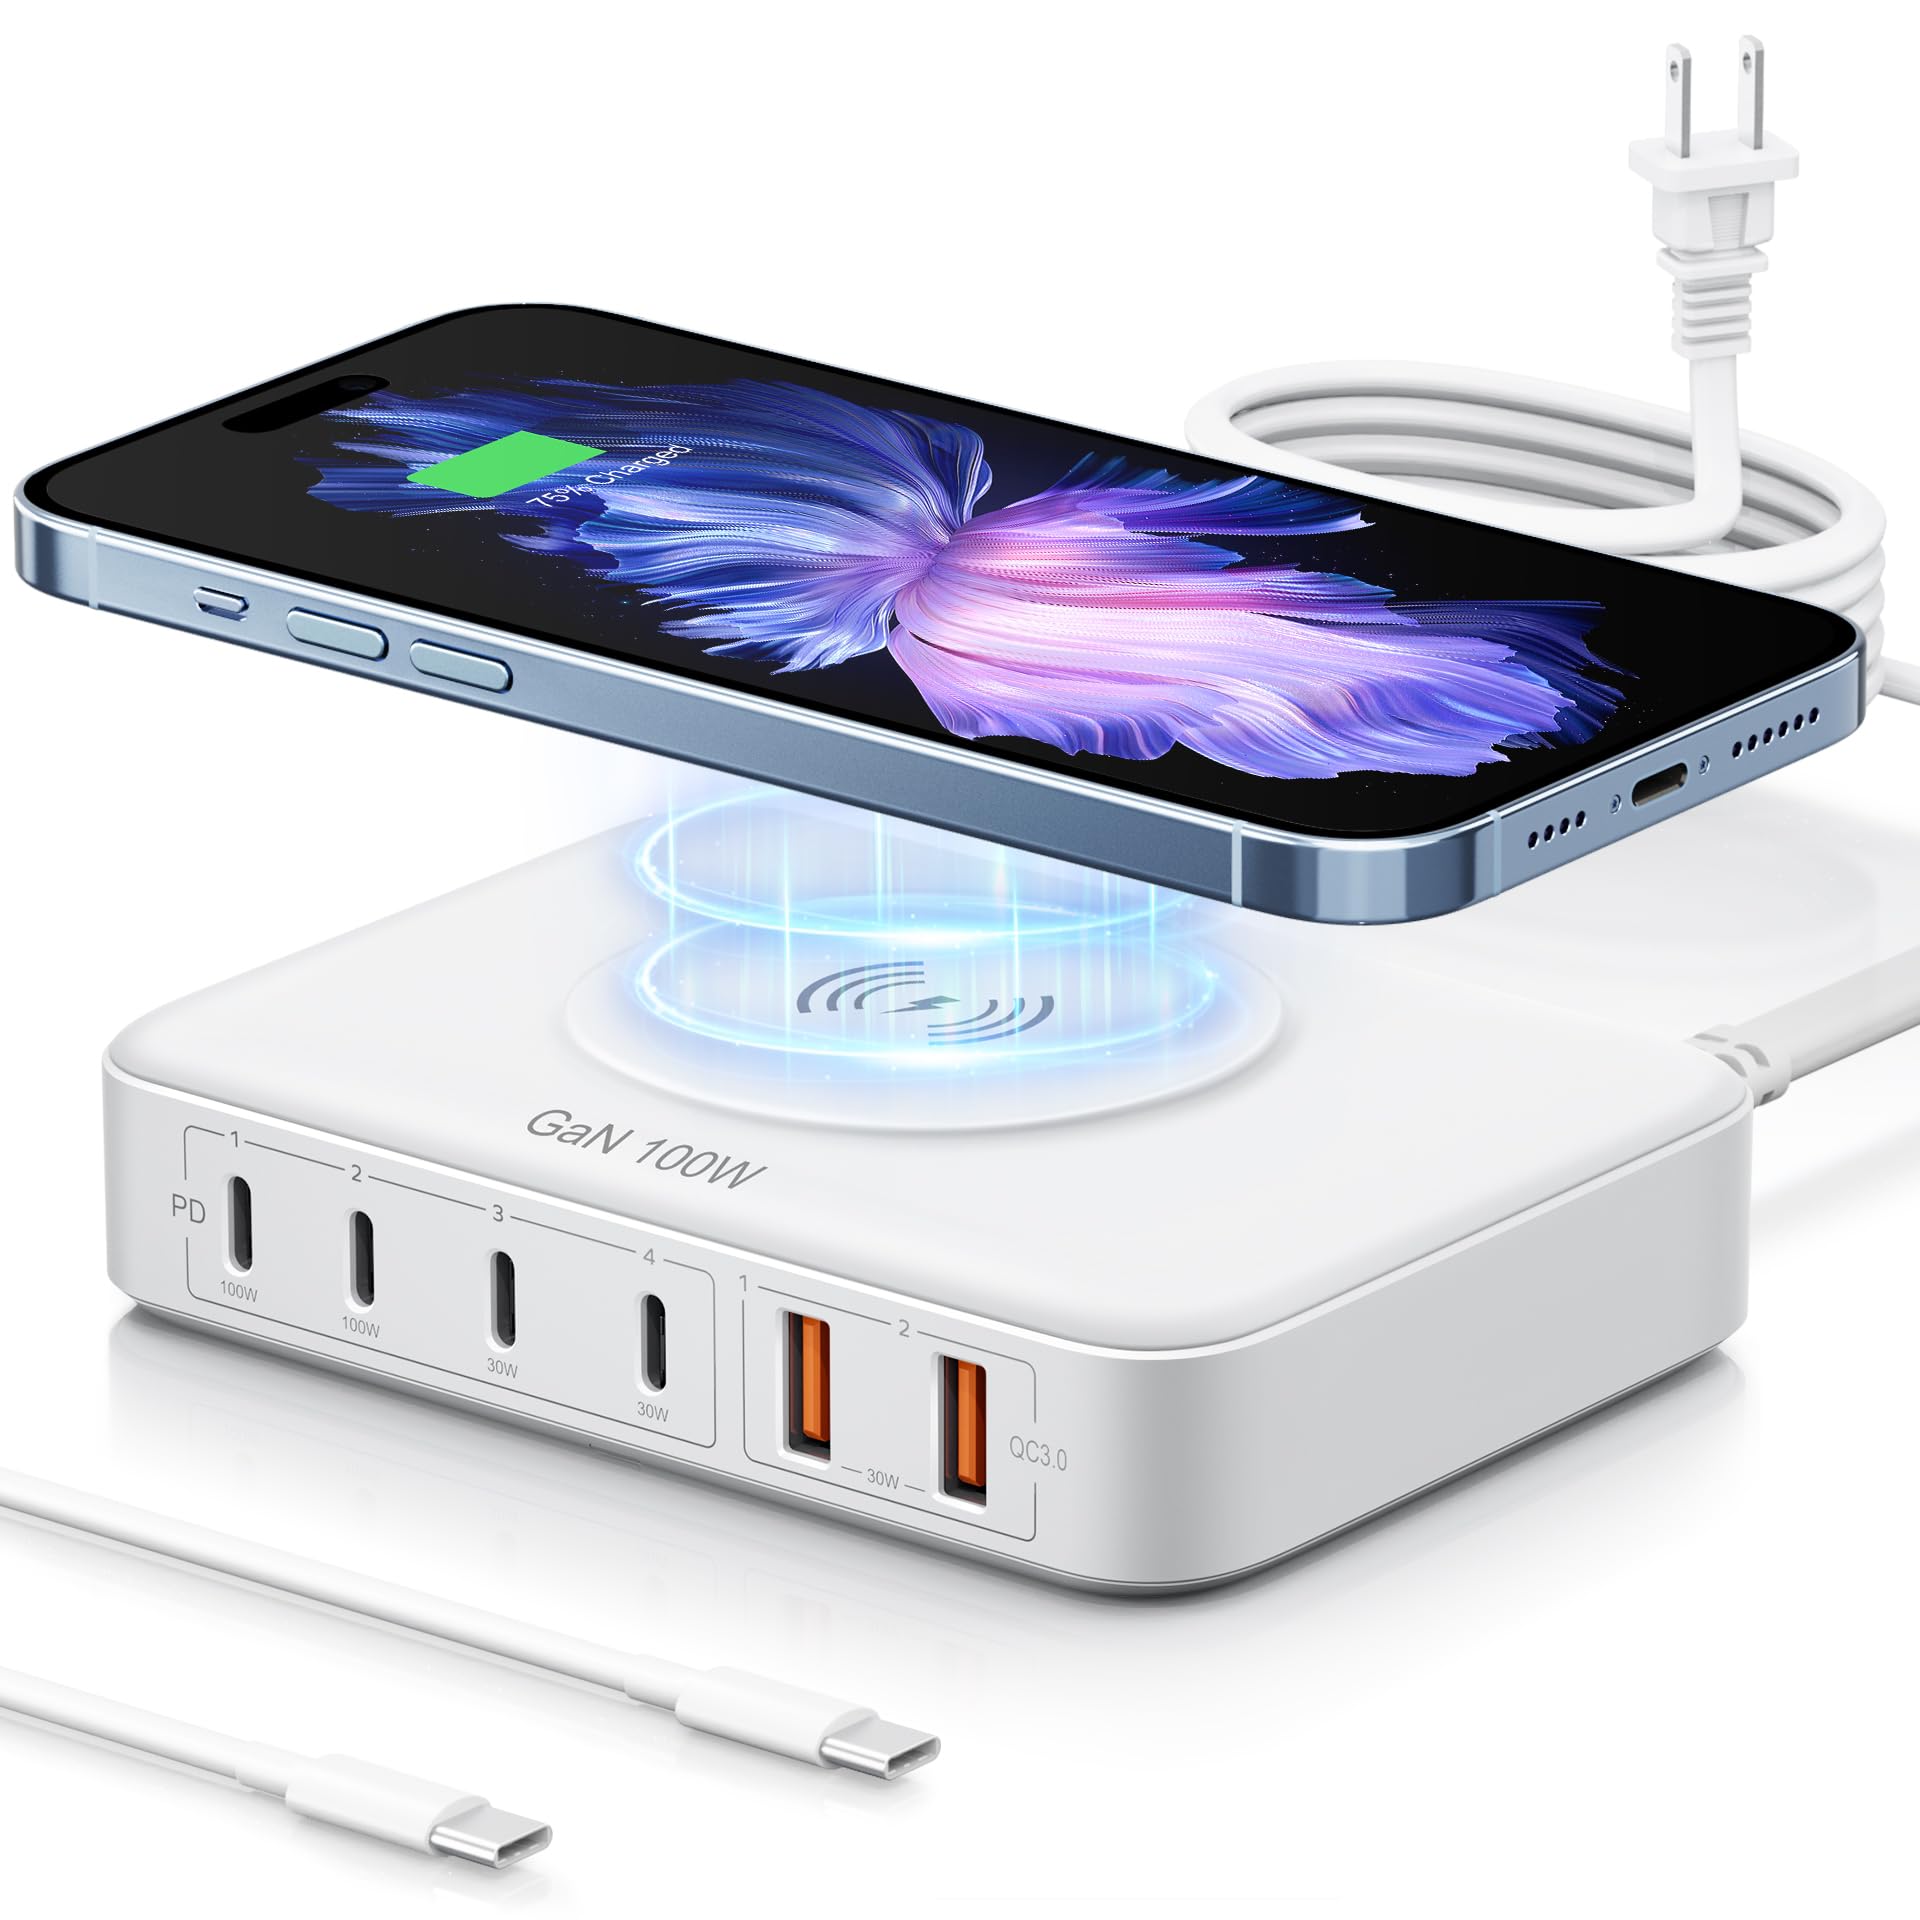 100W USB Charging Station with 15W Wireless Charger, Marnana 6-in-1 Multiple USB Ports(2 USB A and 4 USB C Ports) GaN Desktop Charger for iPhone iPad MacBook Laptop Samsung and Android Devices